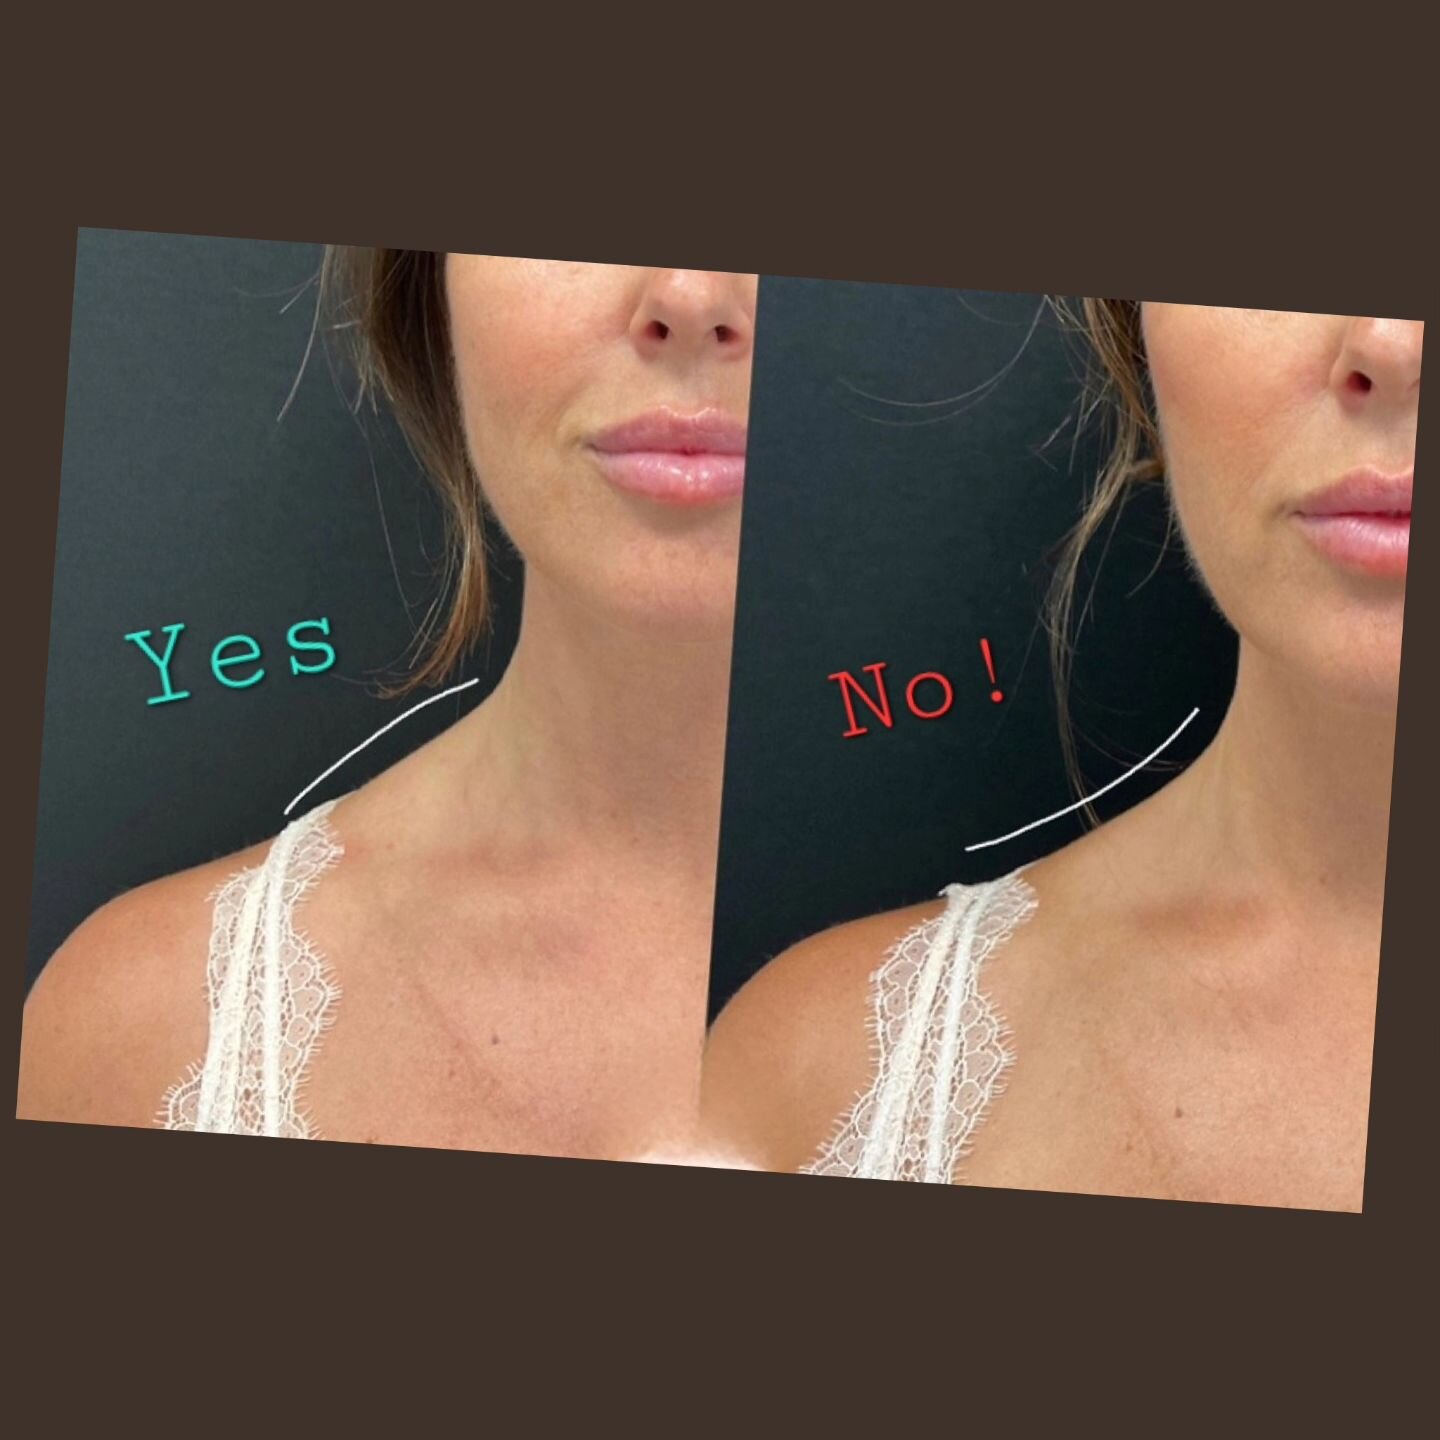 In recent times, a concerning trend has emerged on platforms like TikTok and Instagram, dubbed &quot;Brabie Botox.&quot; This practice involves regular Botox injections into the trapezius muscles (shoulders) with the aim of achieving a slimmer and mo